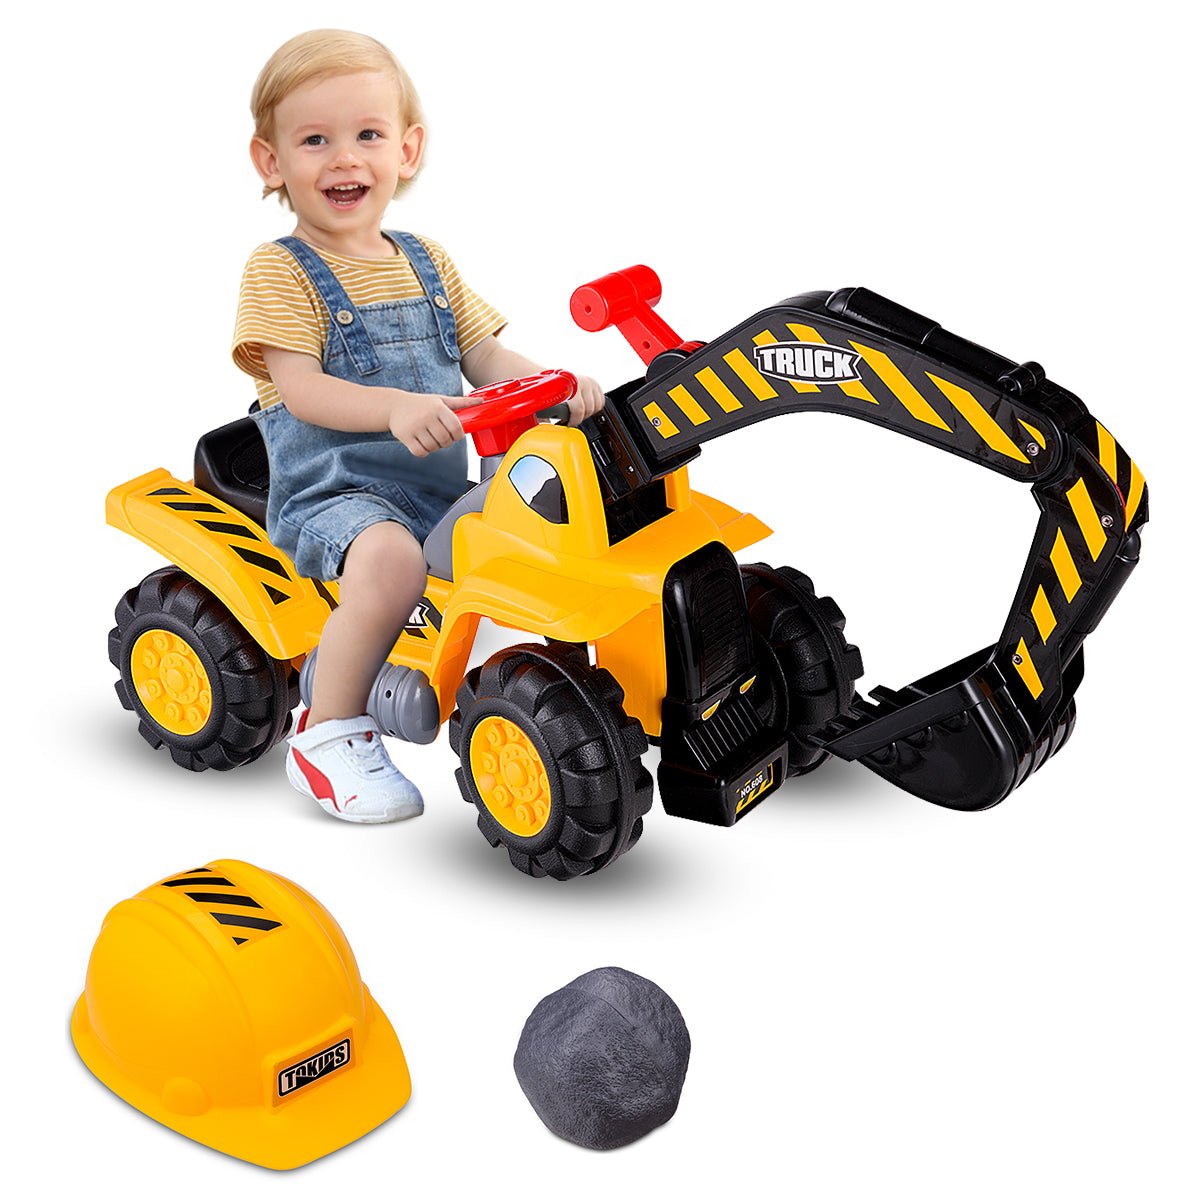 Growing through Play: Excavator Ride On Toy for Kids with Helmet